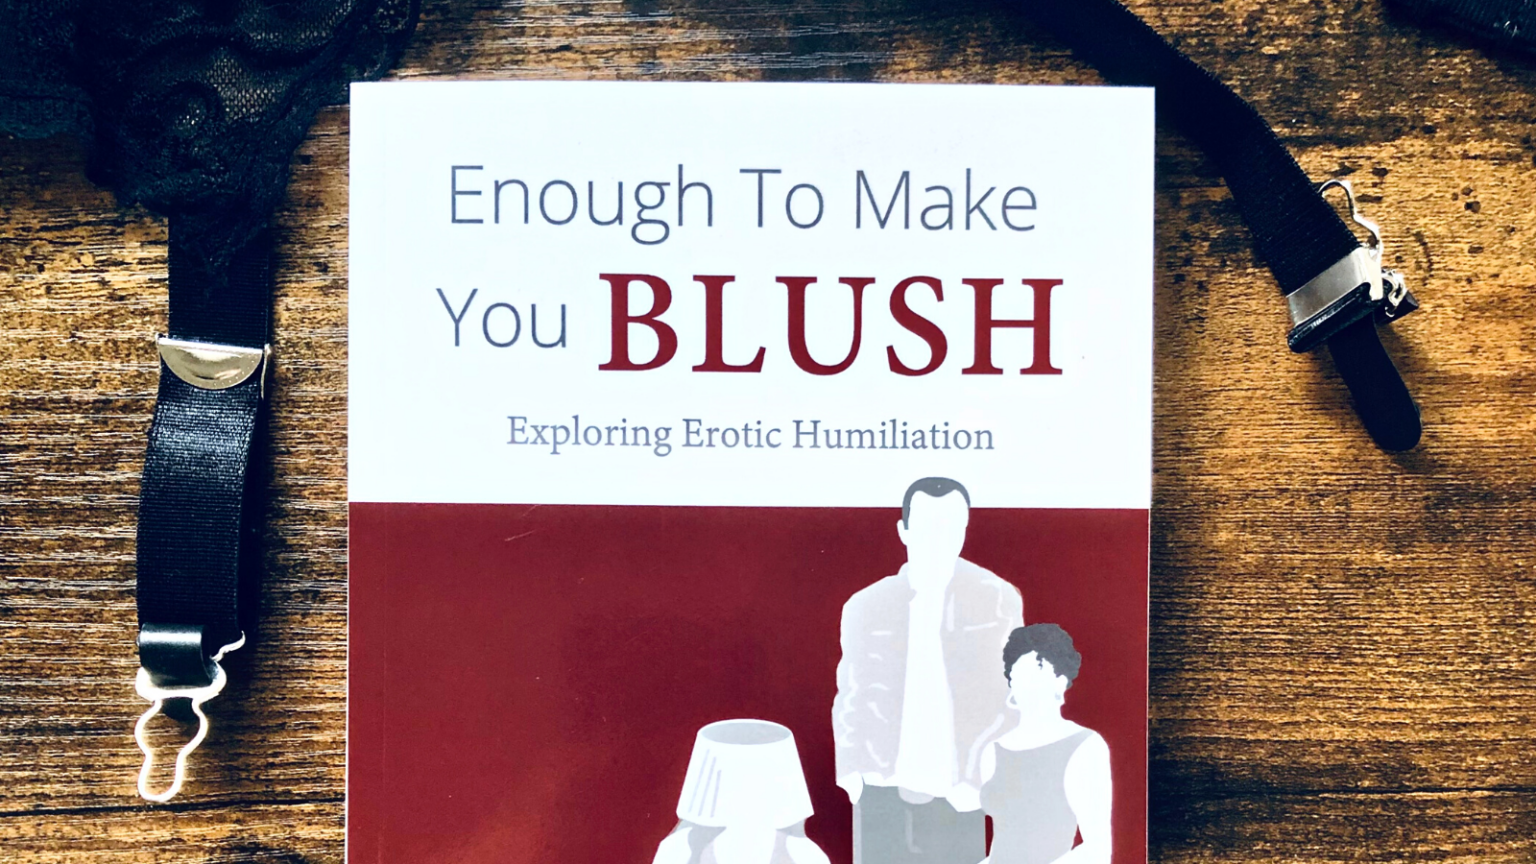 Enough To Make You Blush book on brown wood background